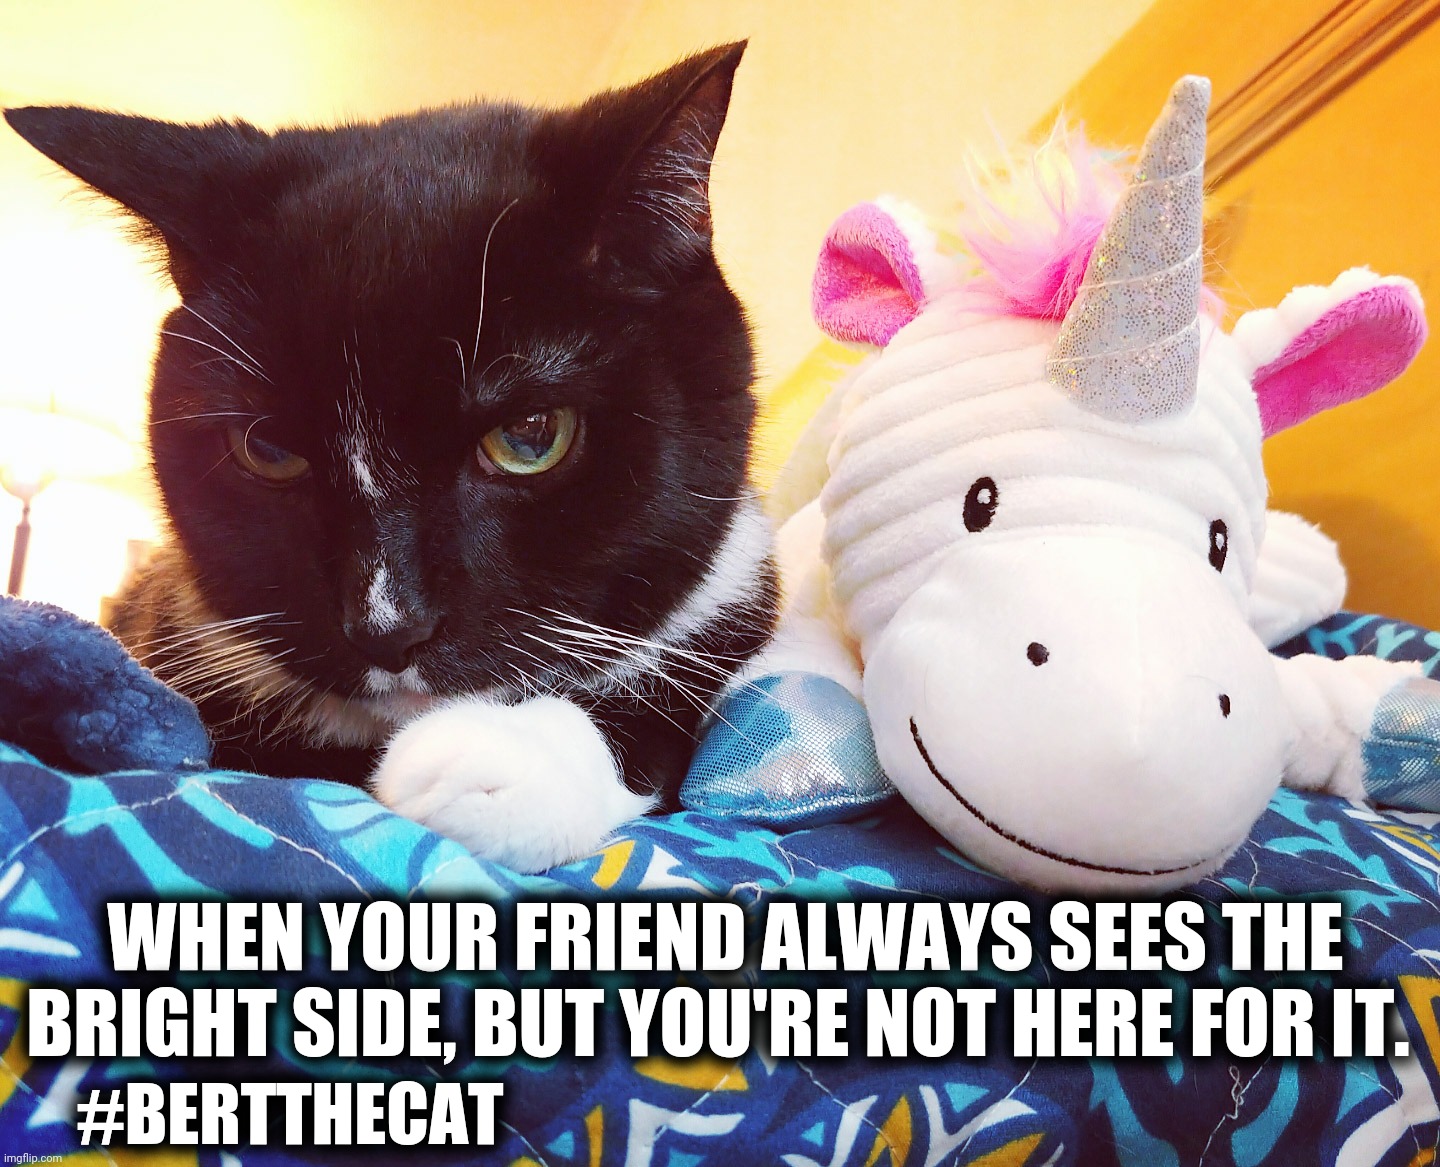 Not here for it |  WHEN YOUR FRIEND ALWAYS SEES THE BRIGHT SIDE, BUT YOU'RE NOT HERE FOR IT. #BERTTHECAT | image tagged in bert the cat,not here for it,funny cats,grumpy,unicorn,mood | made w/ Imgflip meme maker